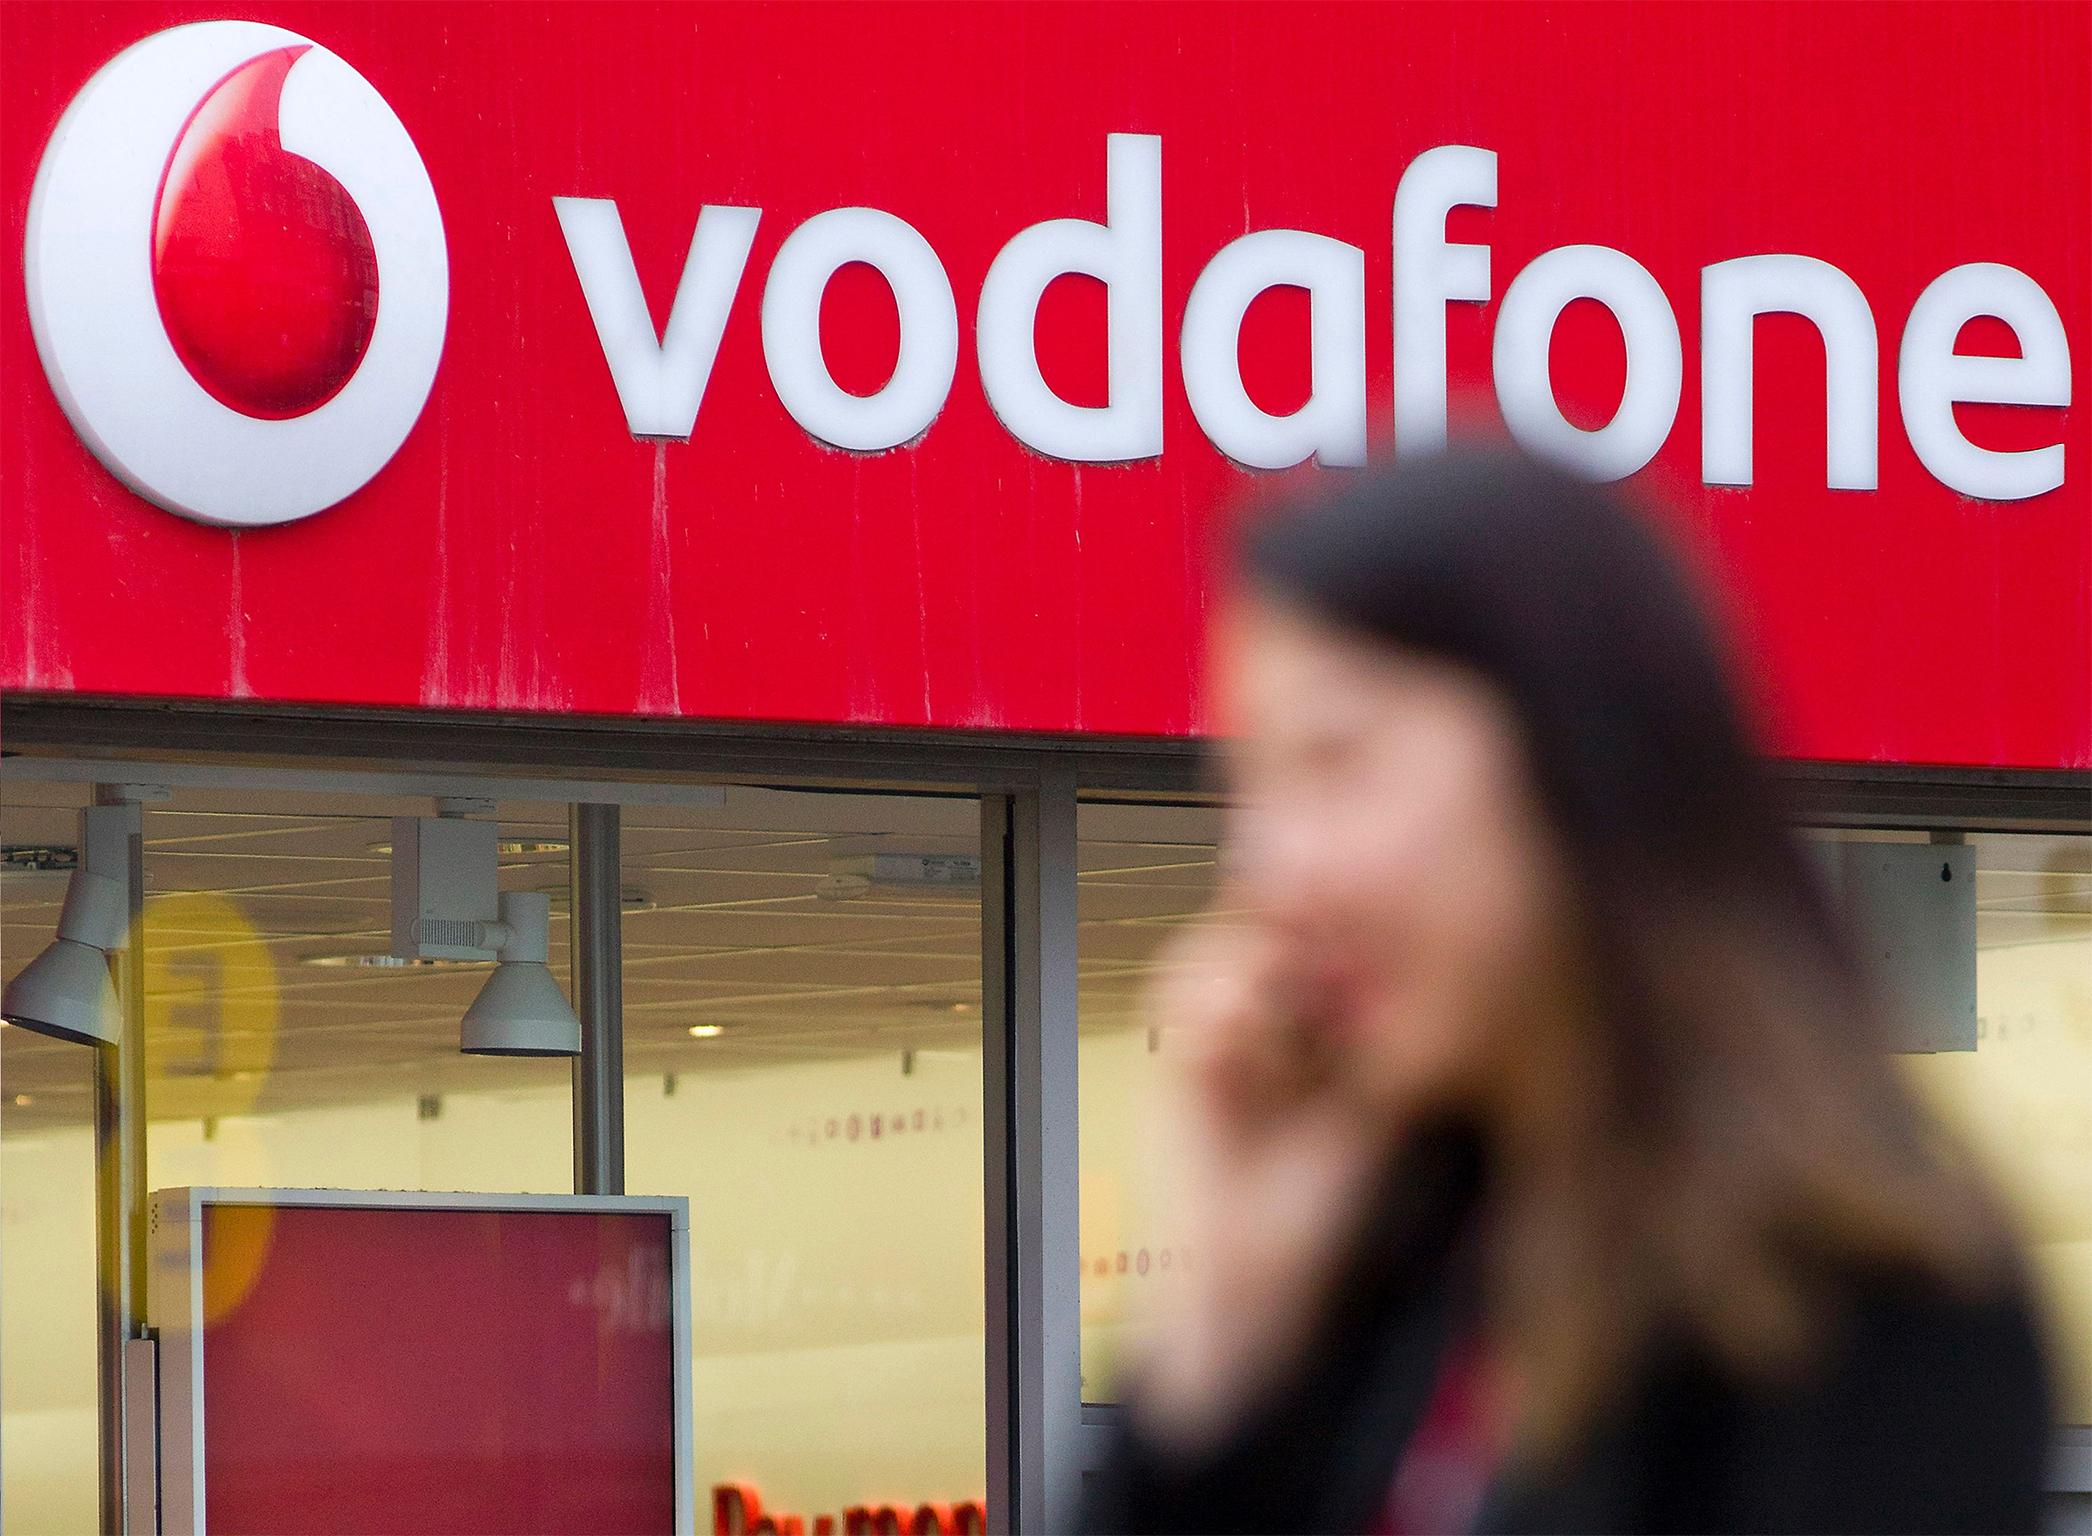 The problems started to occur when Vodafone moved customers from its legacy system to a new state-of-the-art system